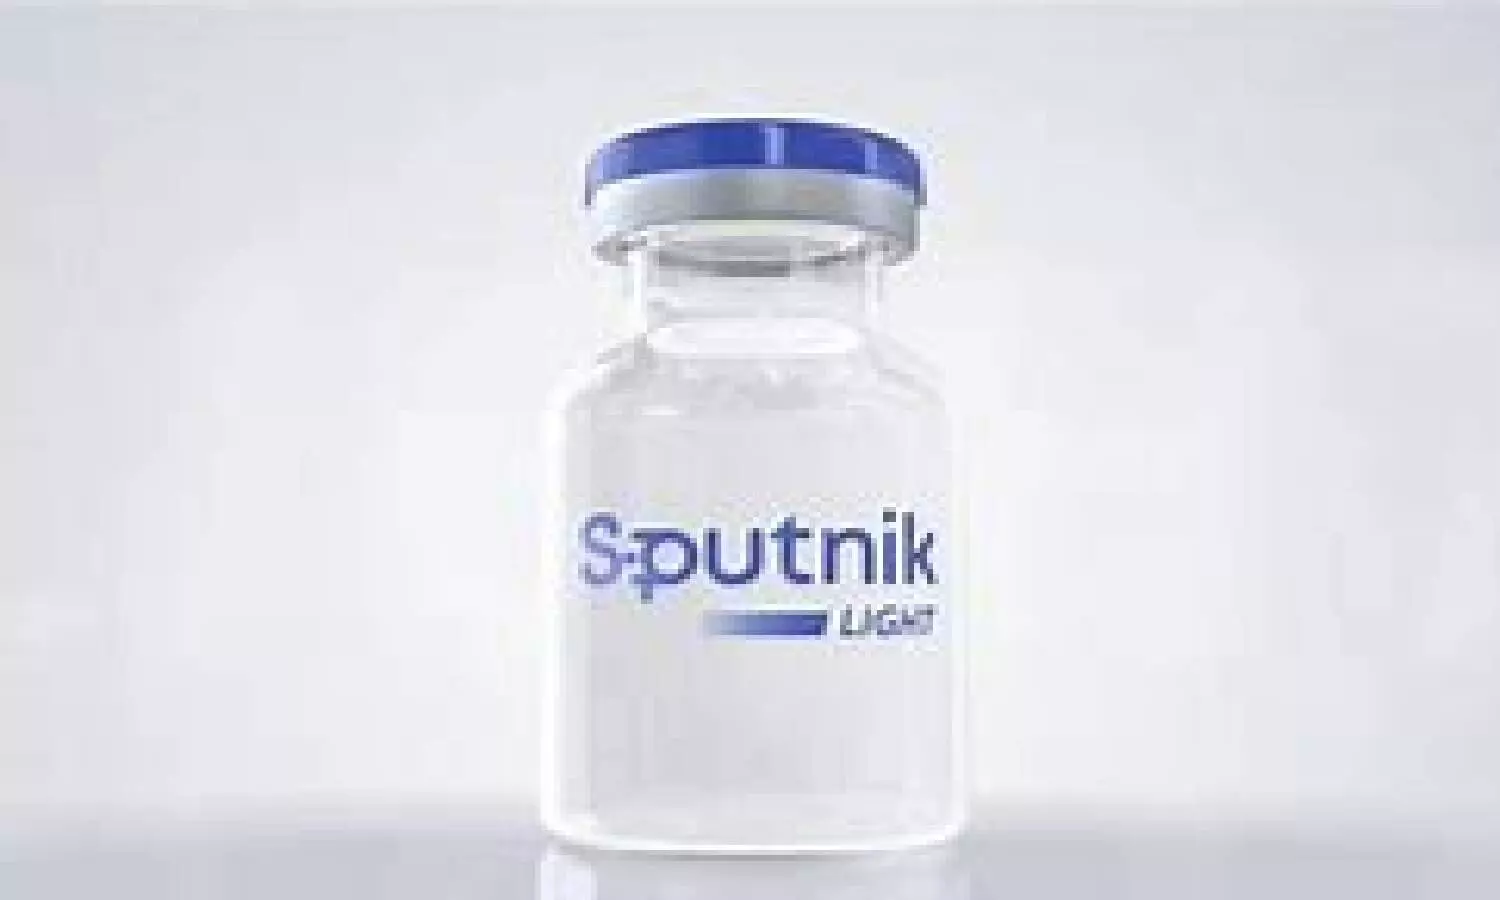 Sputnik Light single-dose vaccine by Dr Reddy’s launch in India may get delayed